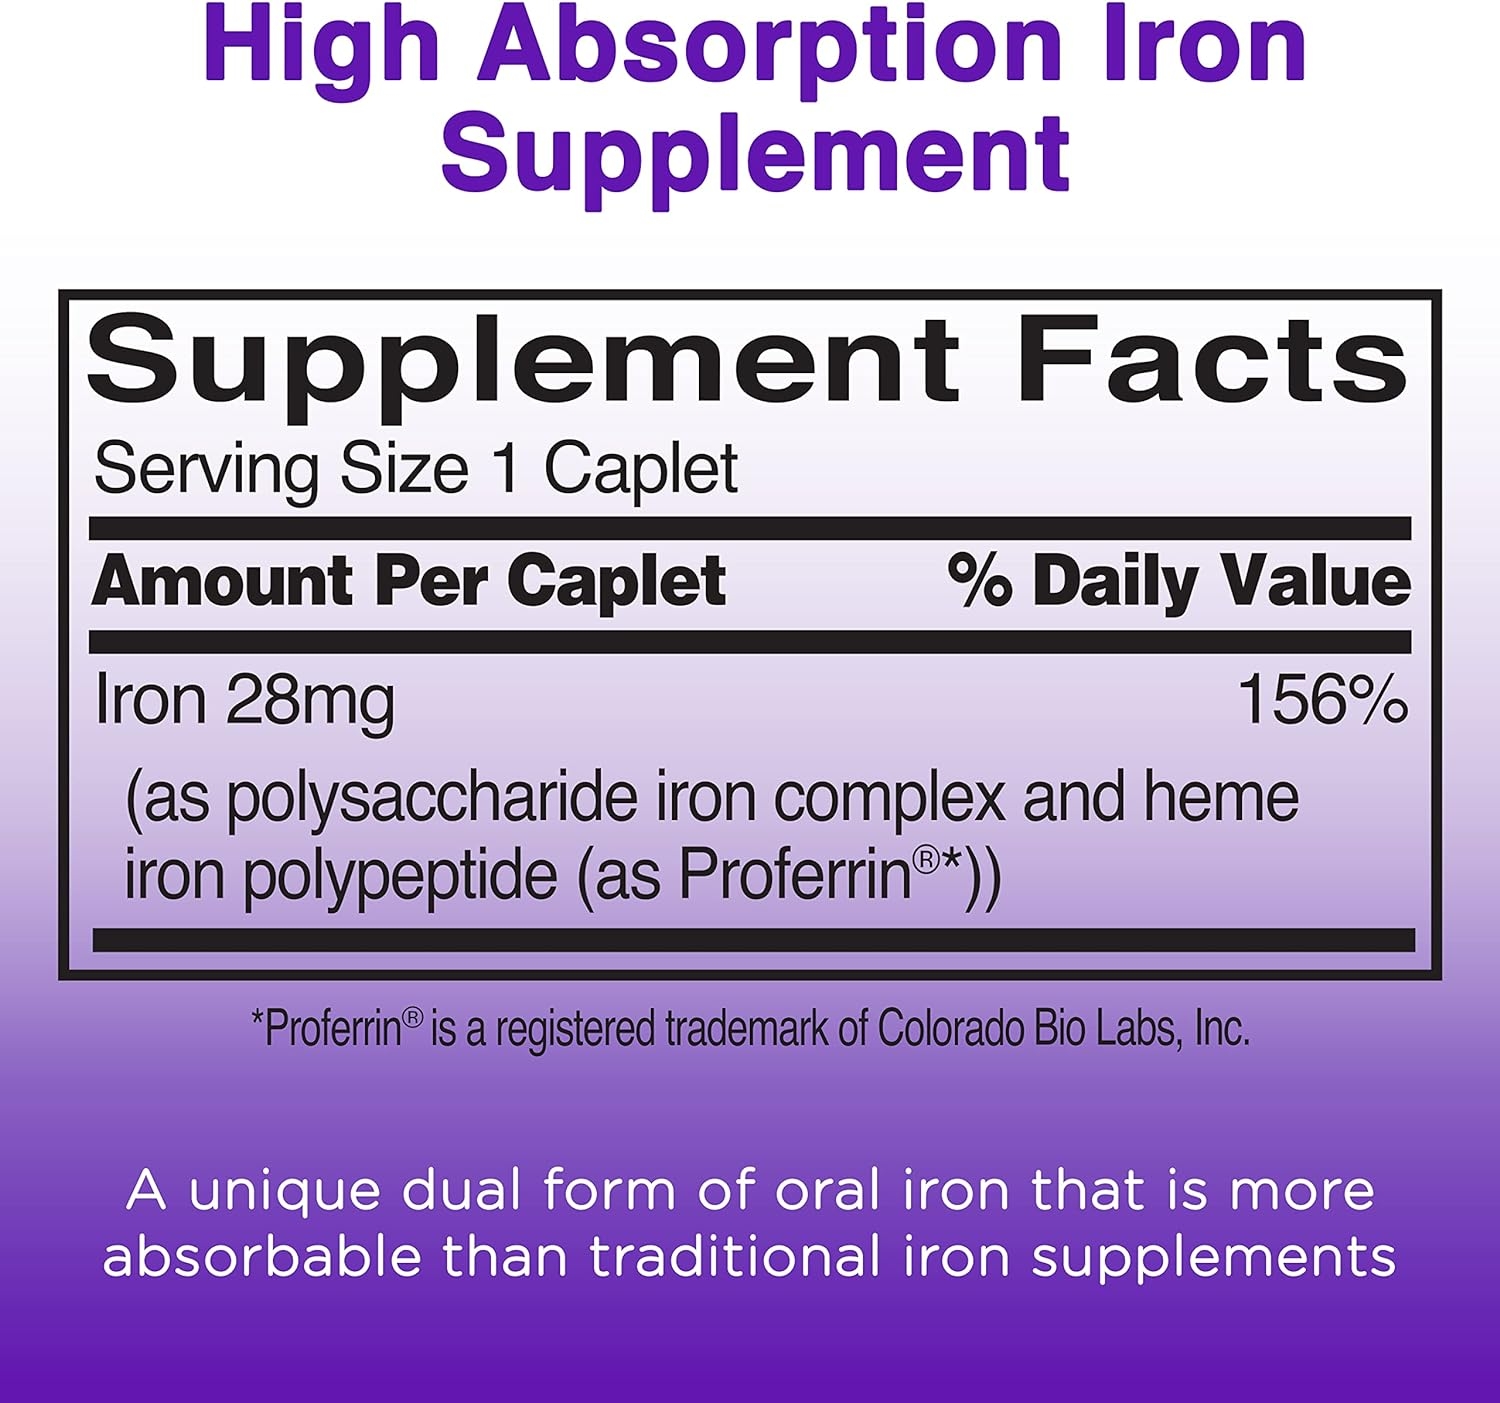 Feosol Complete Iron Supplement Caplets, Bifera Iron for High Absorption, Heme and Non-Heme Dual Action Minimizes Side Effects, 1 Per Day, For Energy and Immune System Support, Made in USA, 30 count